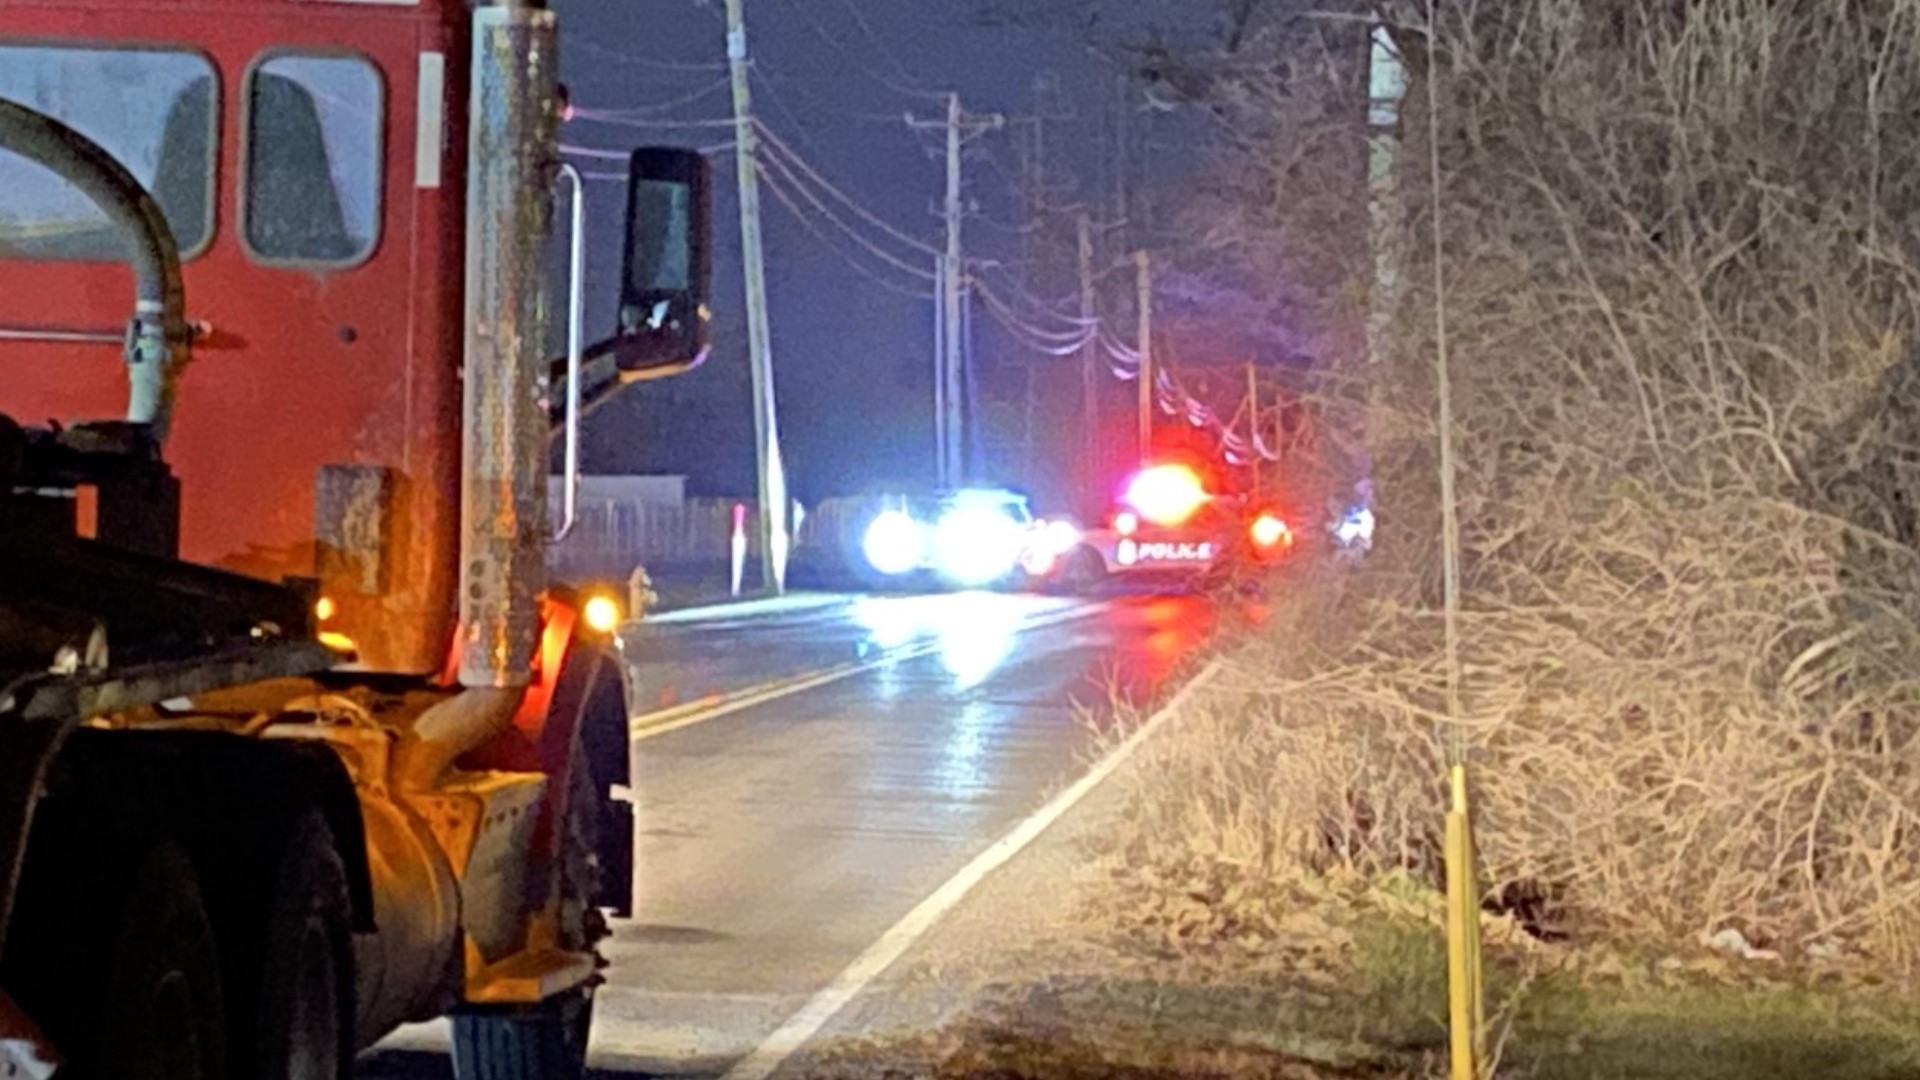 The crash happened at the corner of Williams Road and Groveport Road just before 5:10 a.m., according to Columbus police.